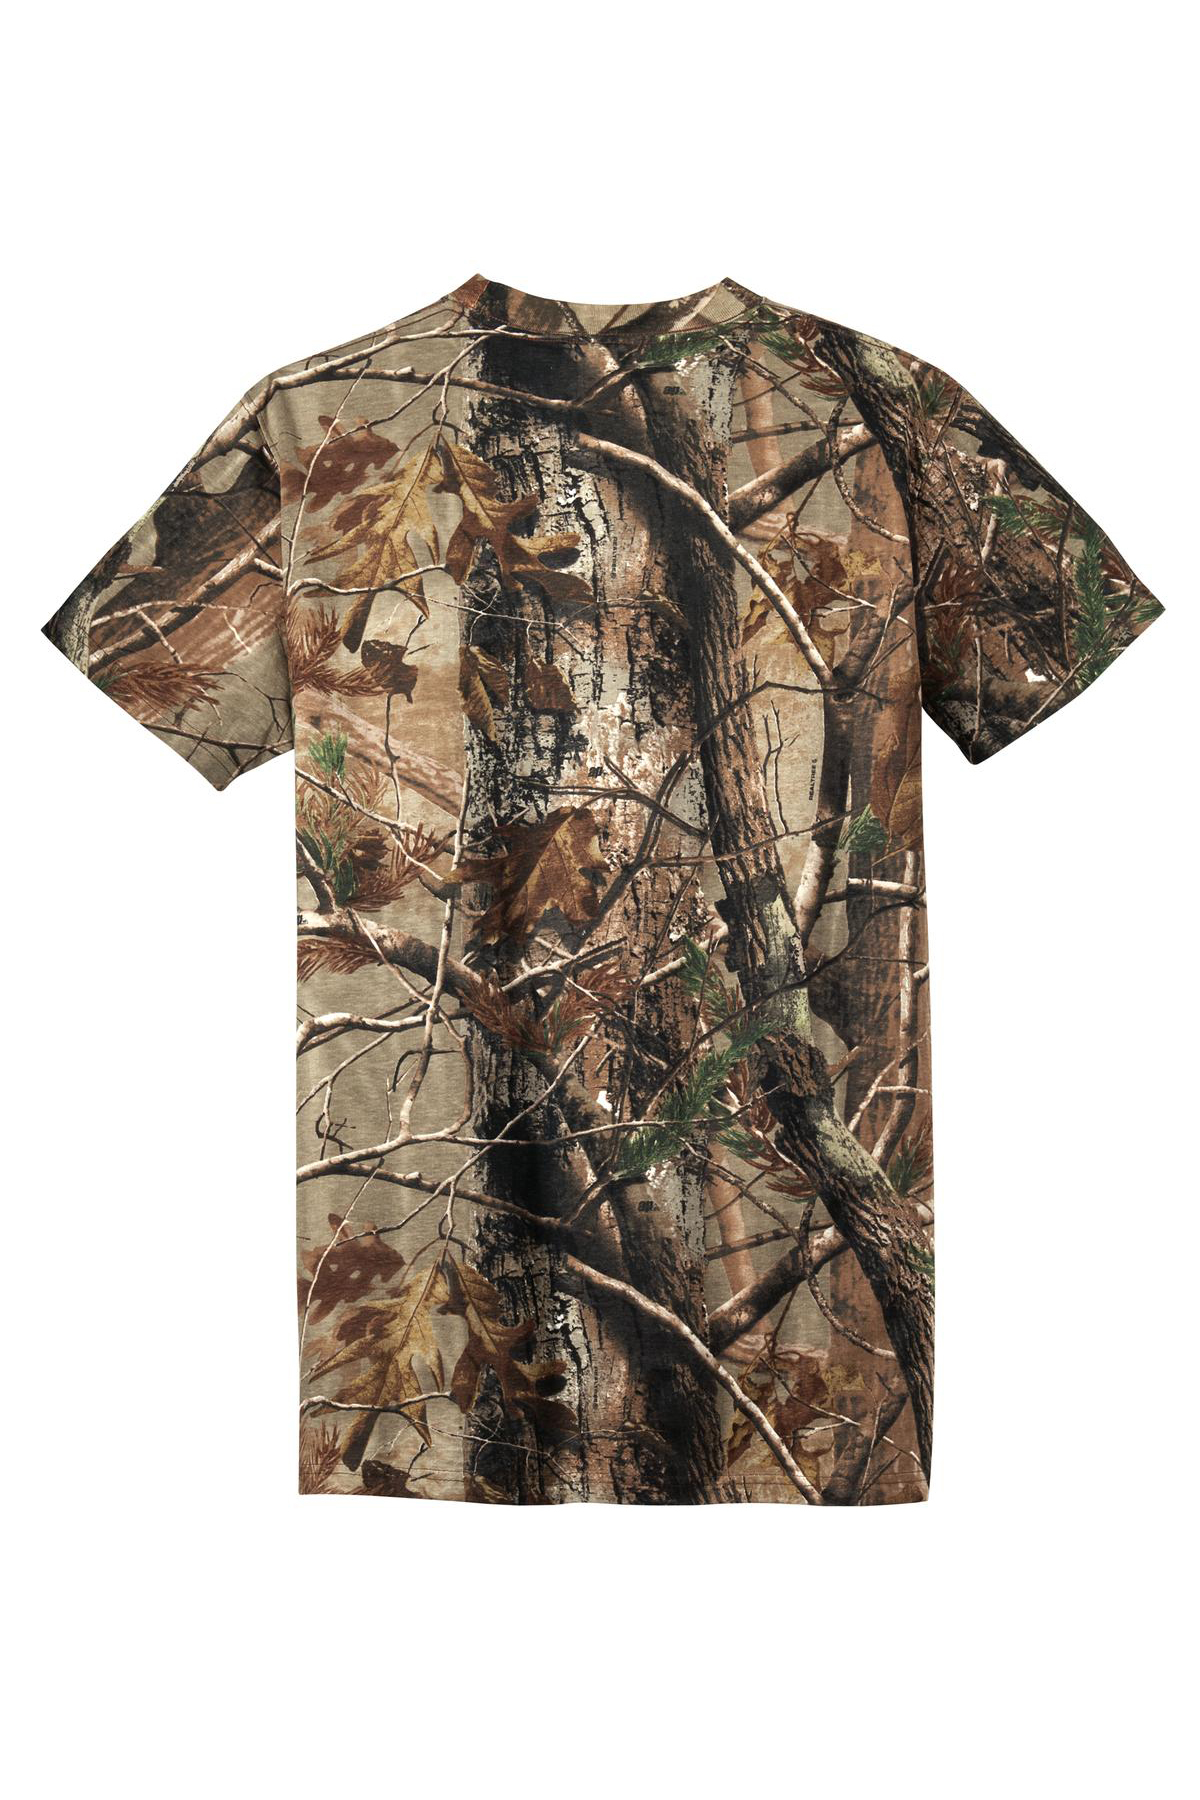 Russell Outdoors - Realtree Explorer 100% Cotton T-Shirt with Pocket ...